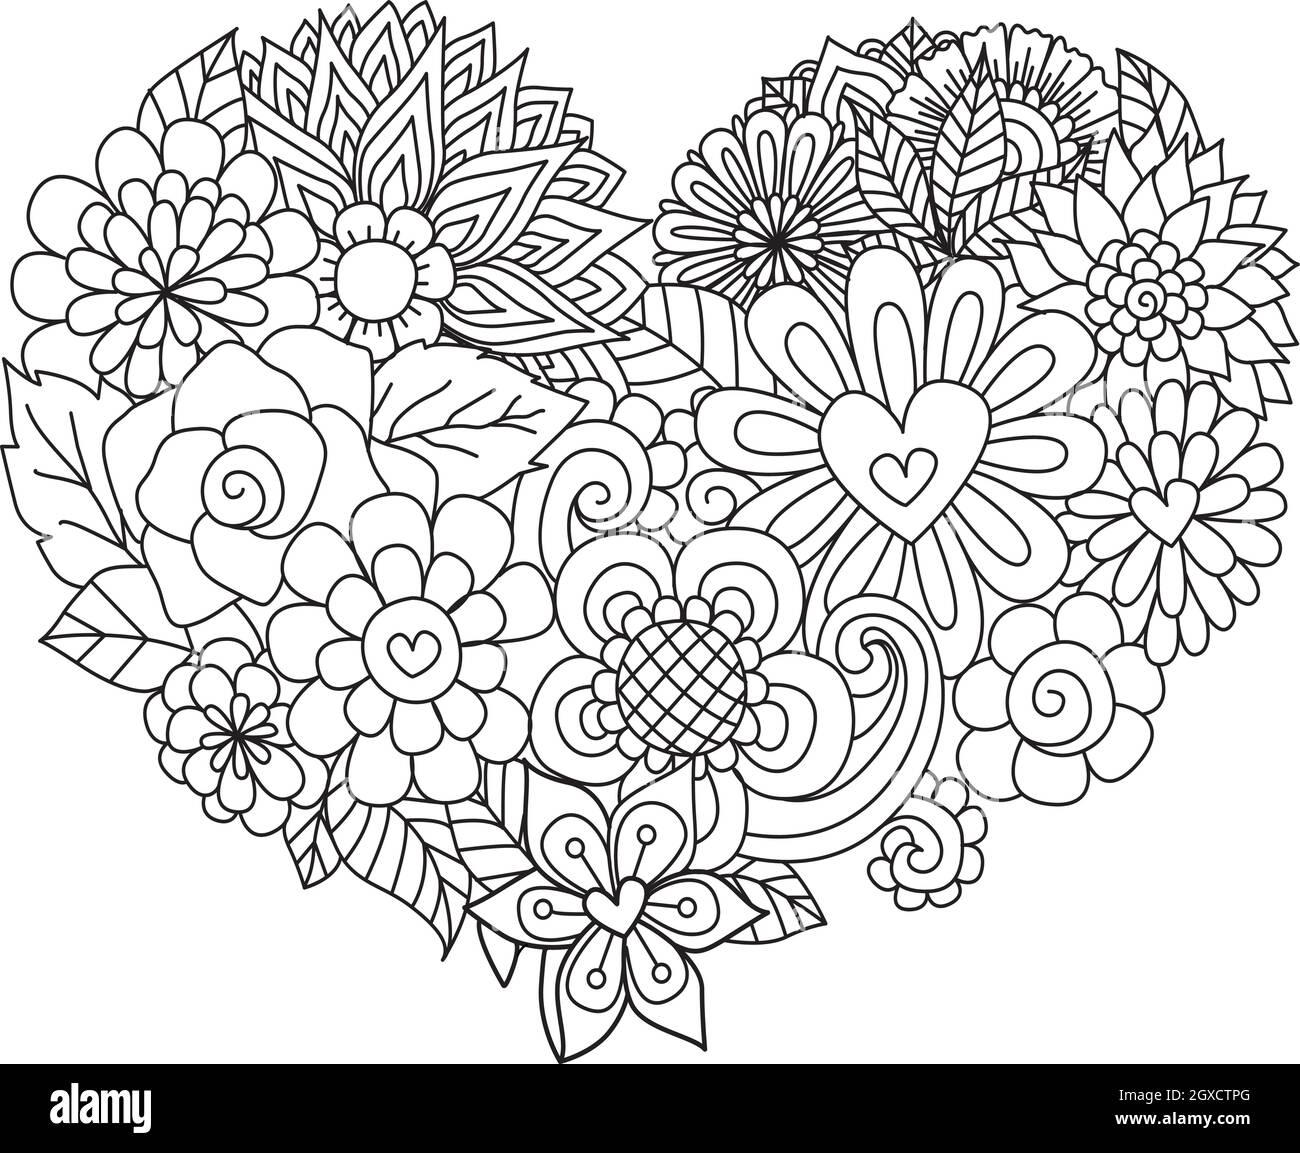 Abstract art for background, adult coloring book, coloring page with the size 8.5x11 inches. Vector illustration. Stock Vector